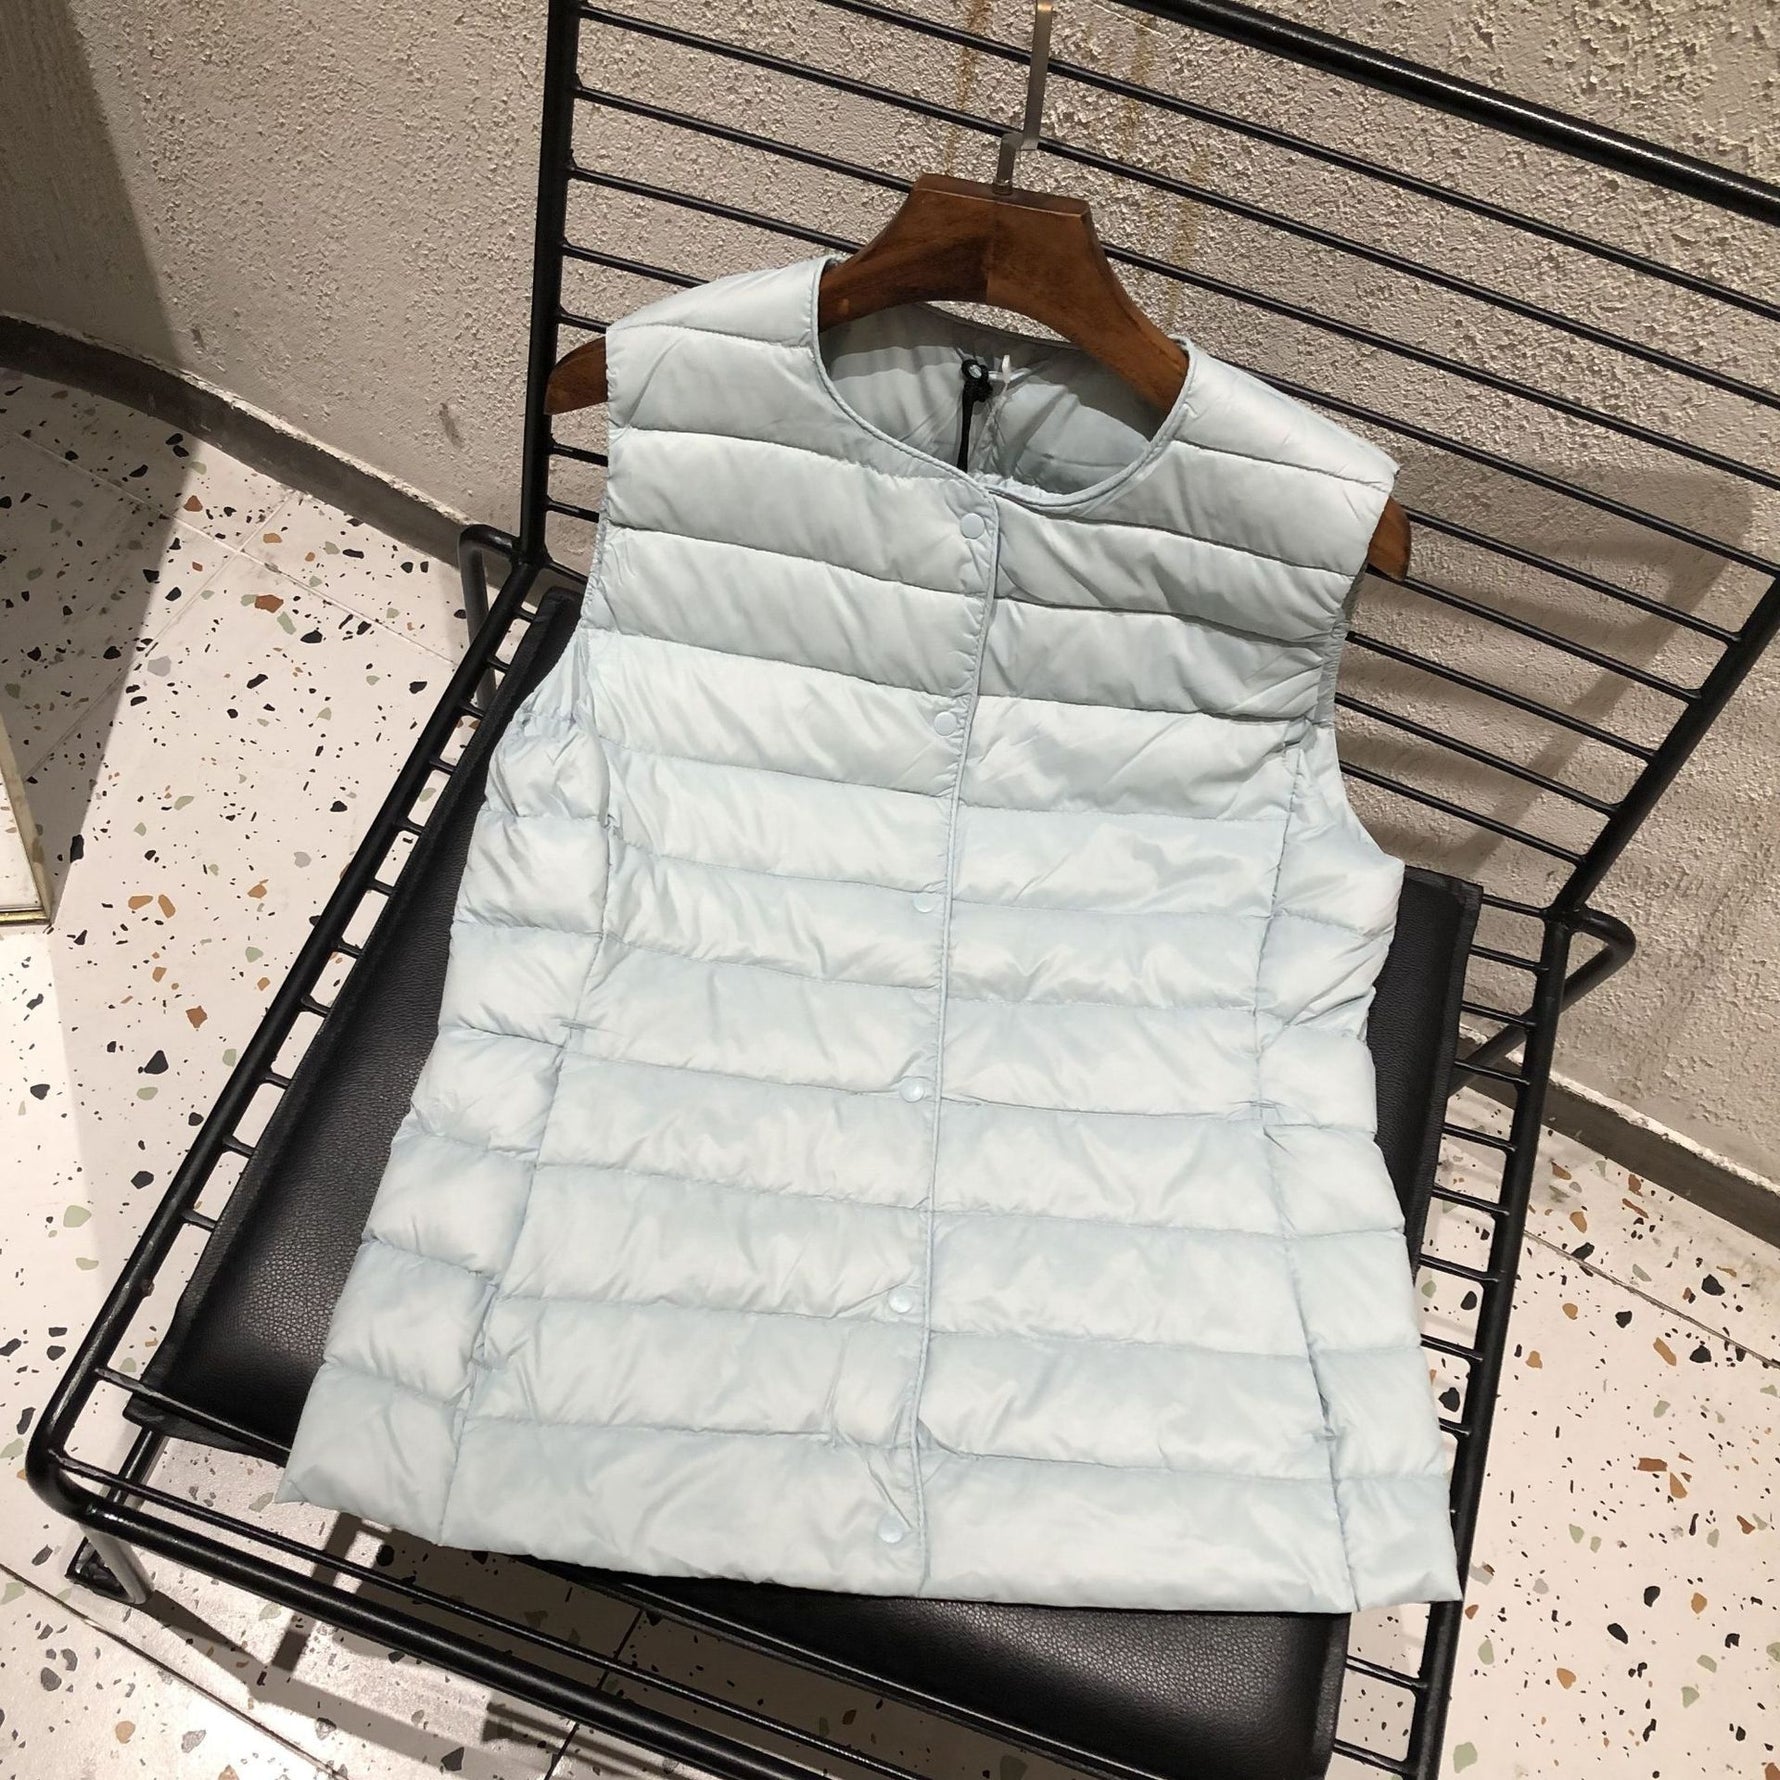 Sleeveless Puffer Jacket Spring Winter Female 90% White Duck Down Ultra Lightweight Packable Warm Down Liner Vest KilyClothing